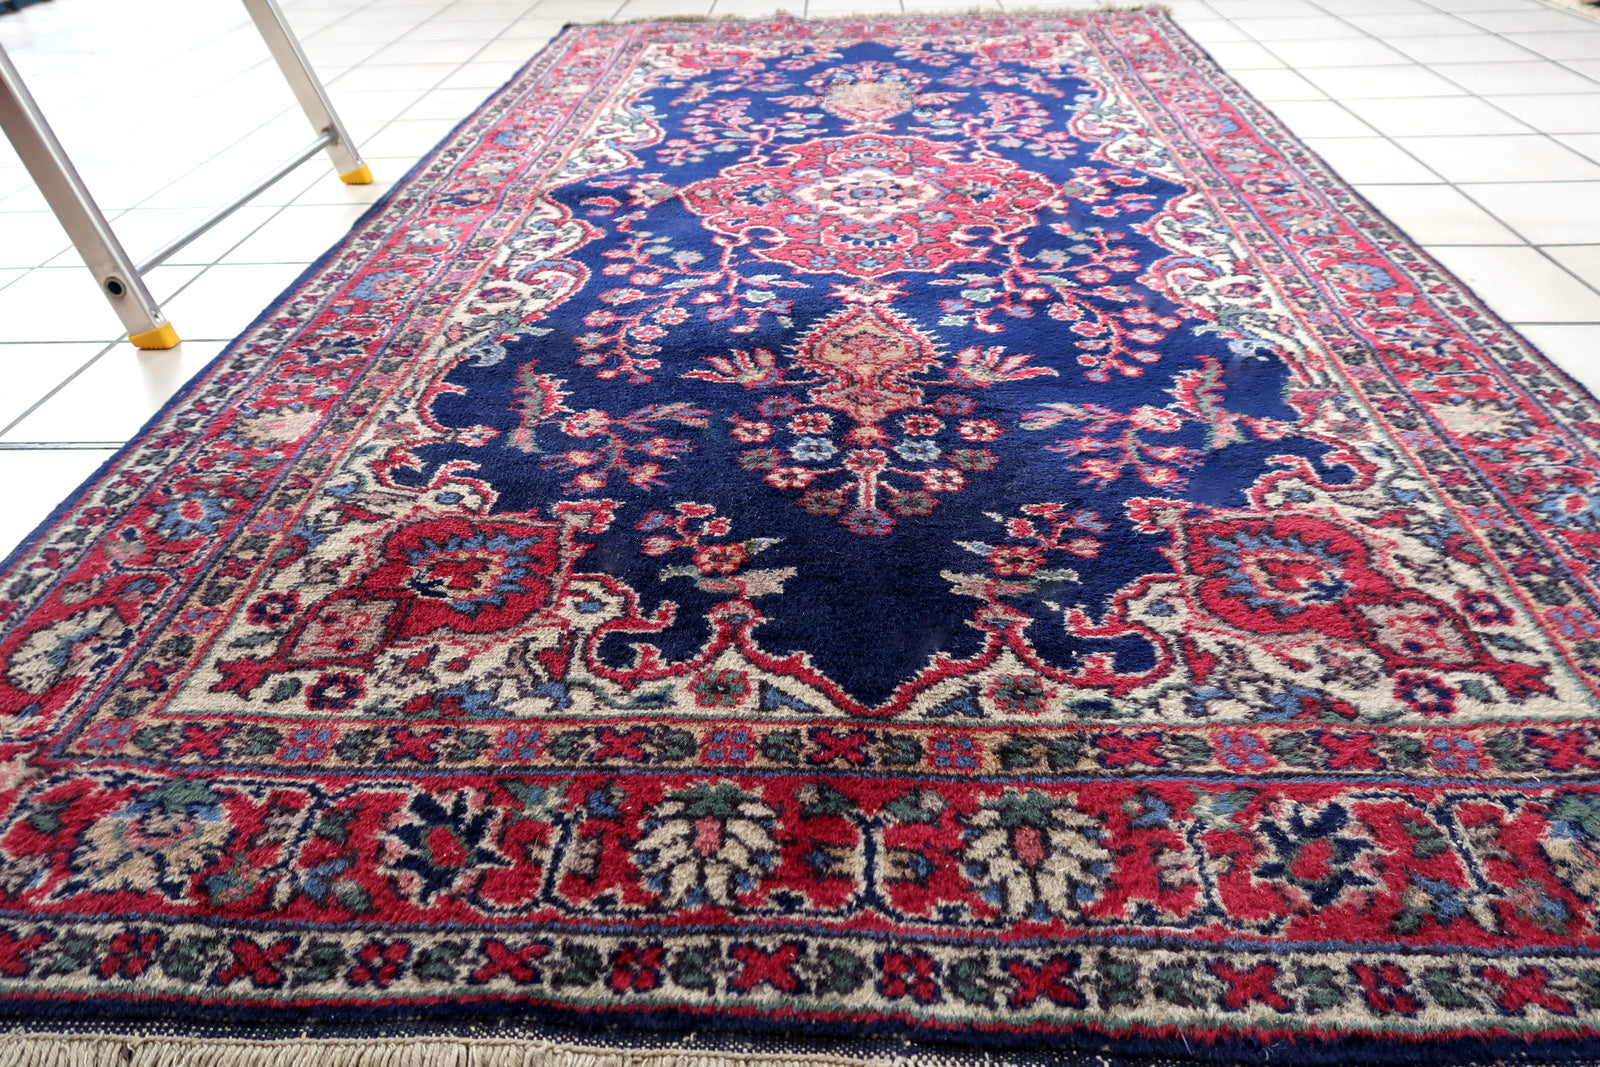 Handmade antique Persian Kerman rug in bright blue and red shades. The rug is from the beginnig of 20th century in good condition.